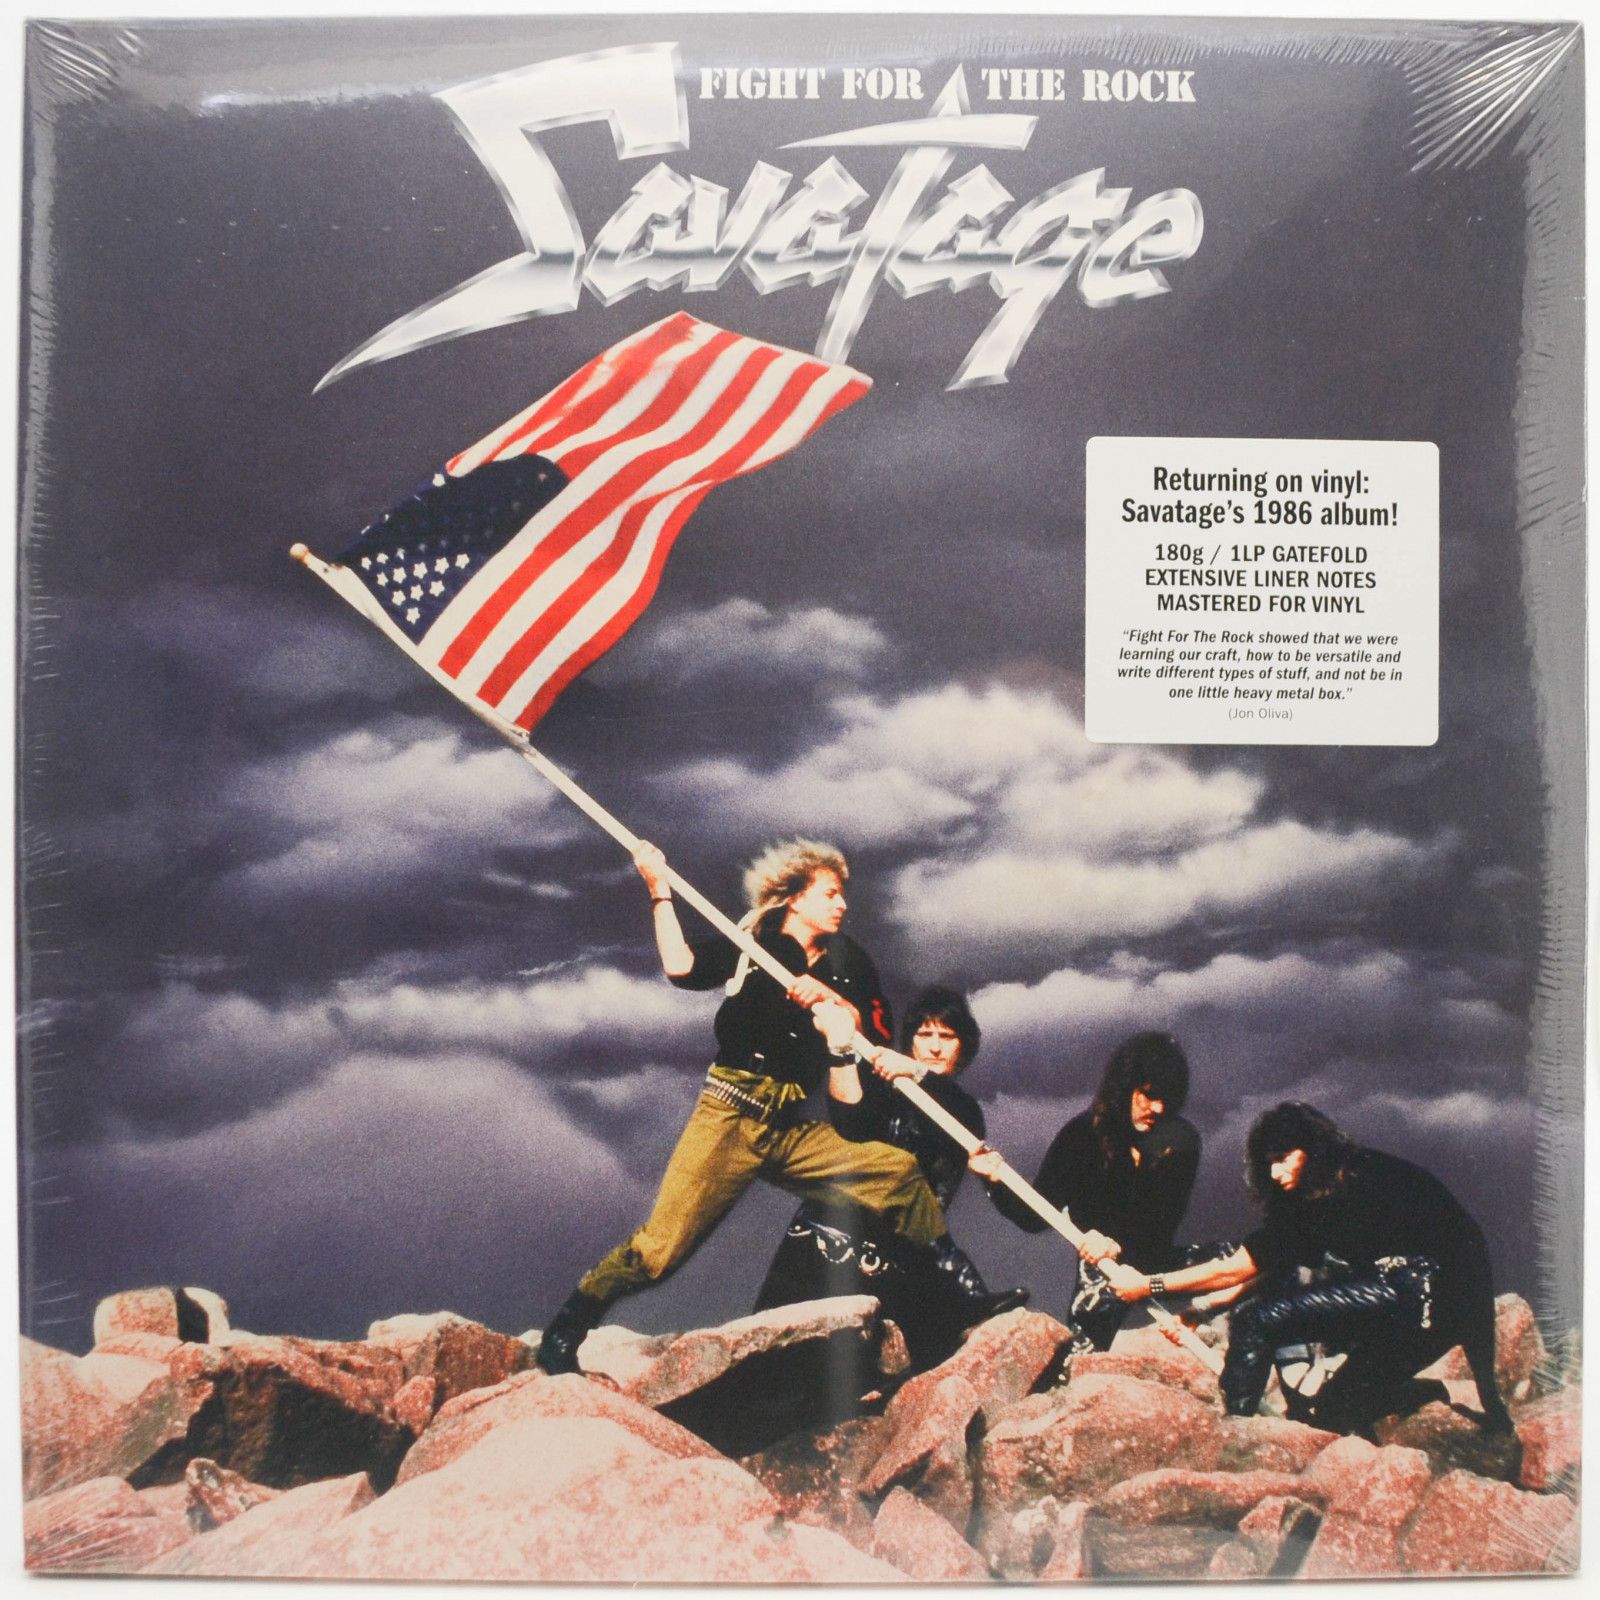 Savatage — Fight For The Rock, 1986